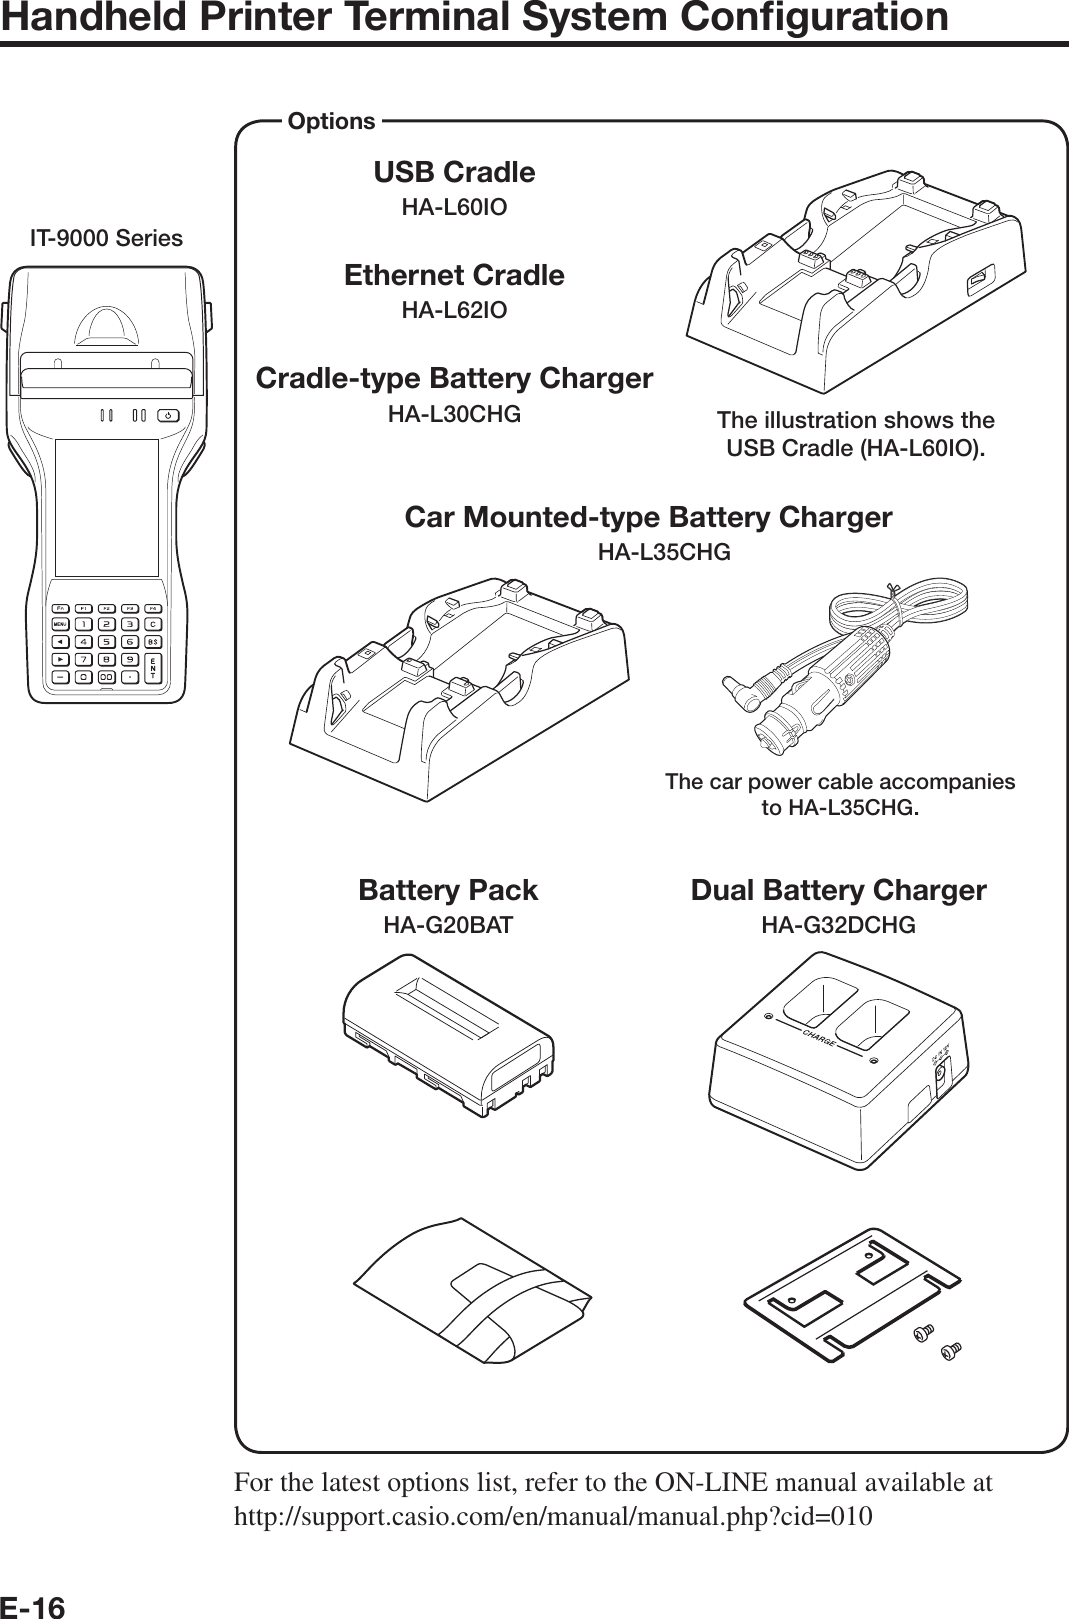 E-16Handheld Printer Terminal System Conﬁ gurationIT-9000 SeriesUSB CradleHA-L60IOEthernet CradleHA-L62IOCradle-type Battery ChargerHA-L30CHG The illustration shows the USB Cradle (HA-L60IO).Car Mounted-type Battery ChargerHA-L35CHGThe car power cable accompanies to HA-L35CHG.Battery Pack HA-G20BATDual Battery Charger HA-G32DCHGOptions For the latest options list, refer to the ON-LINE manual available at http://support.casio.com/en/manual/manual.php?cid=010